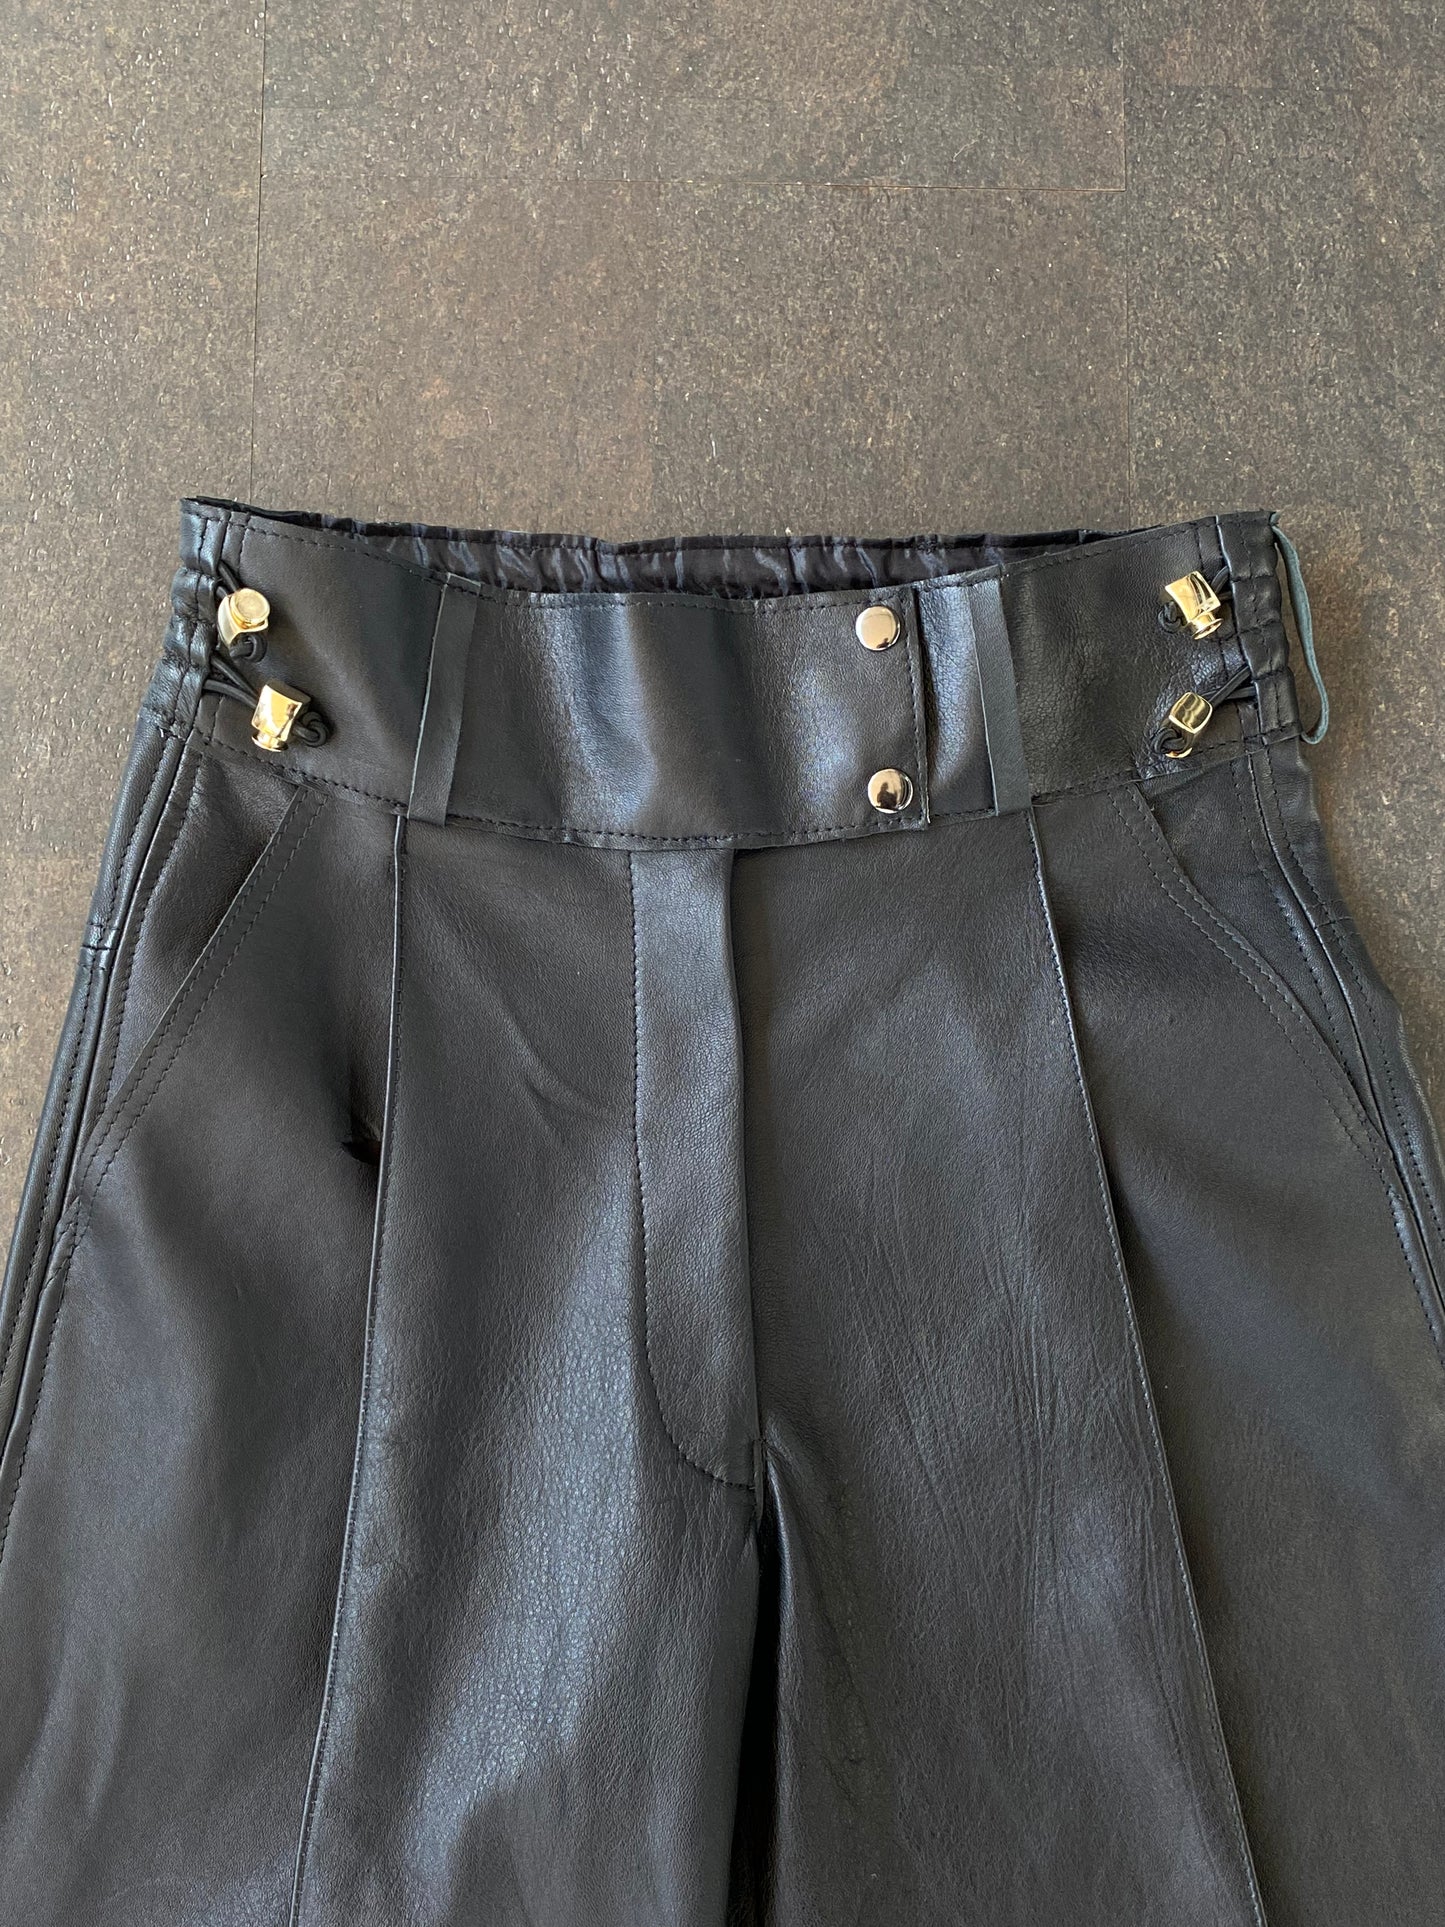 Connected Leather Shorts